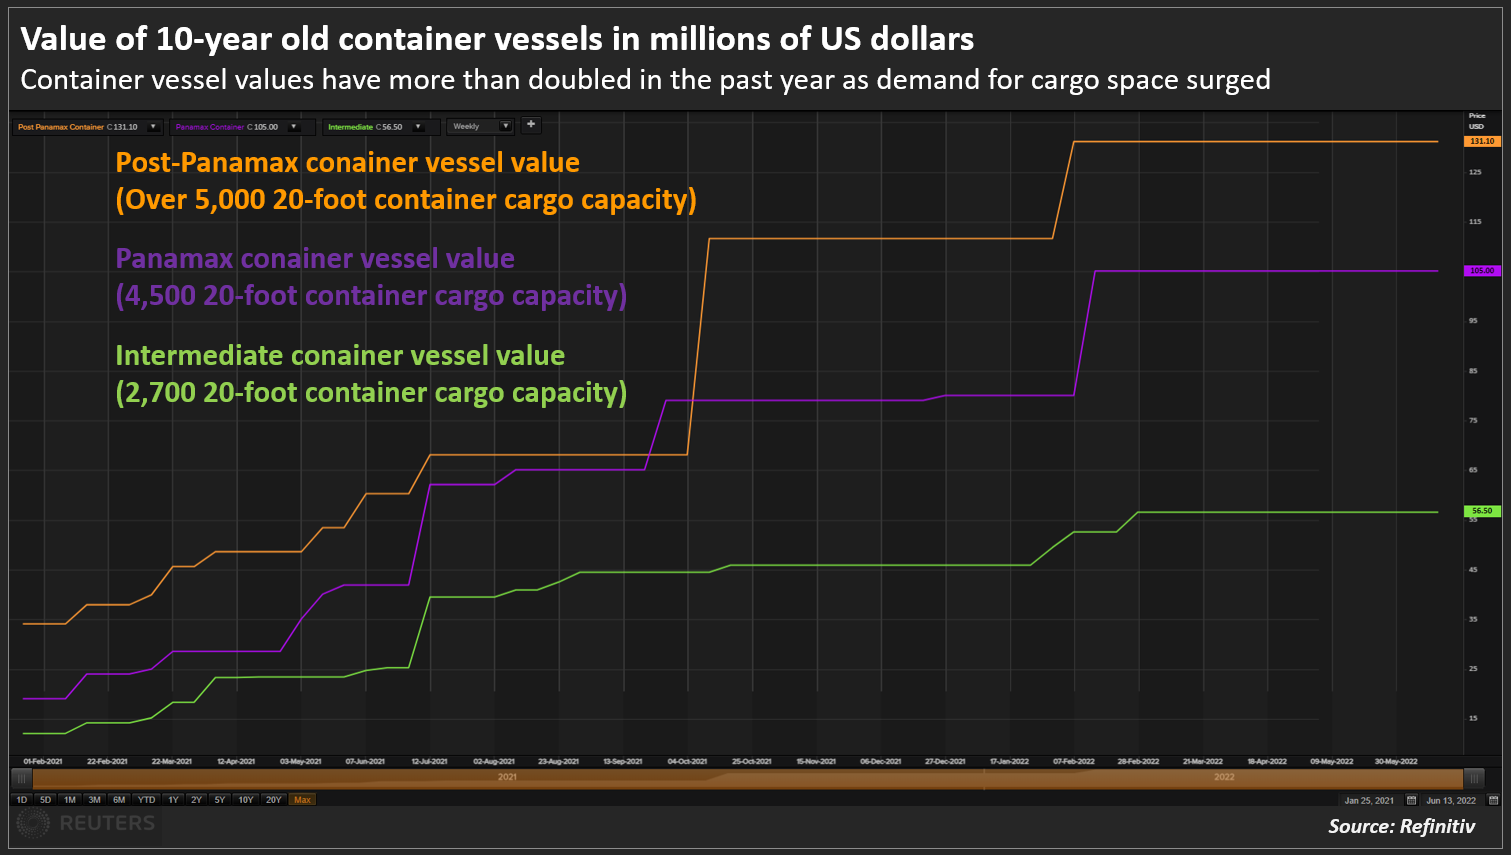 Value of 10-year old container vessels in millions of US dollars